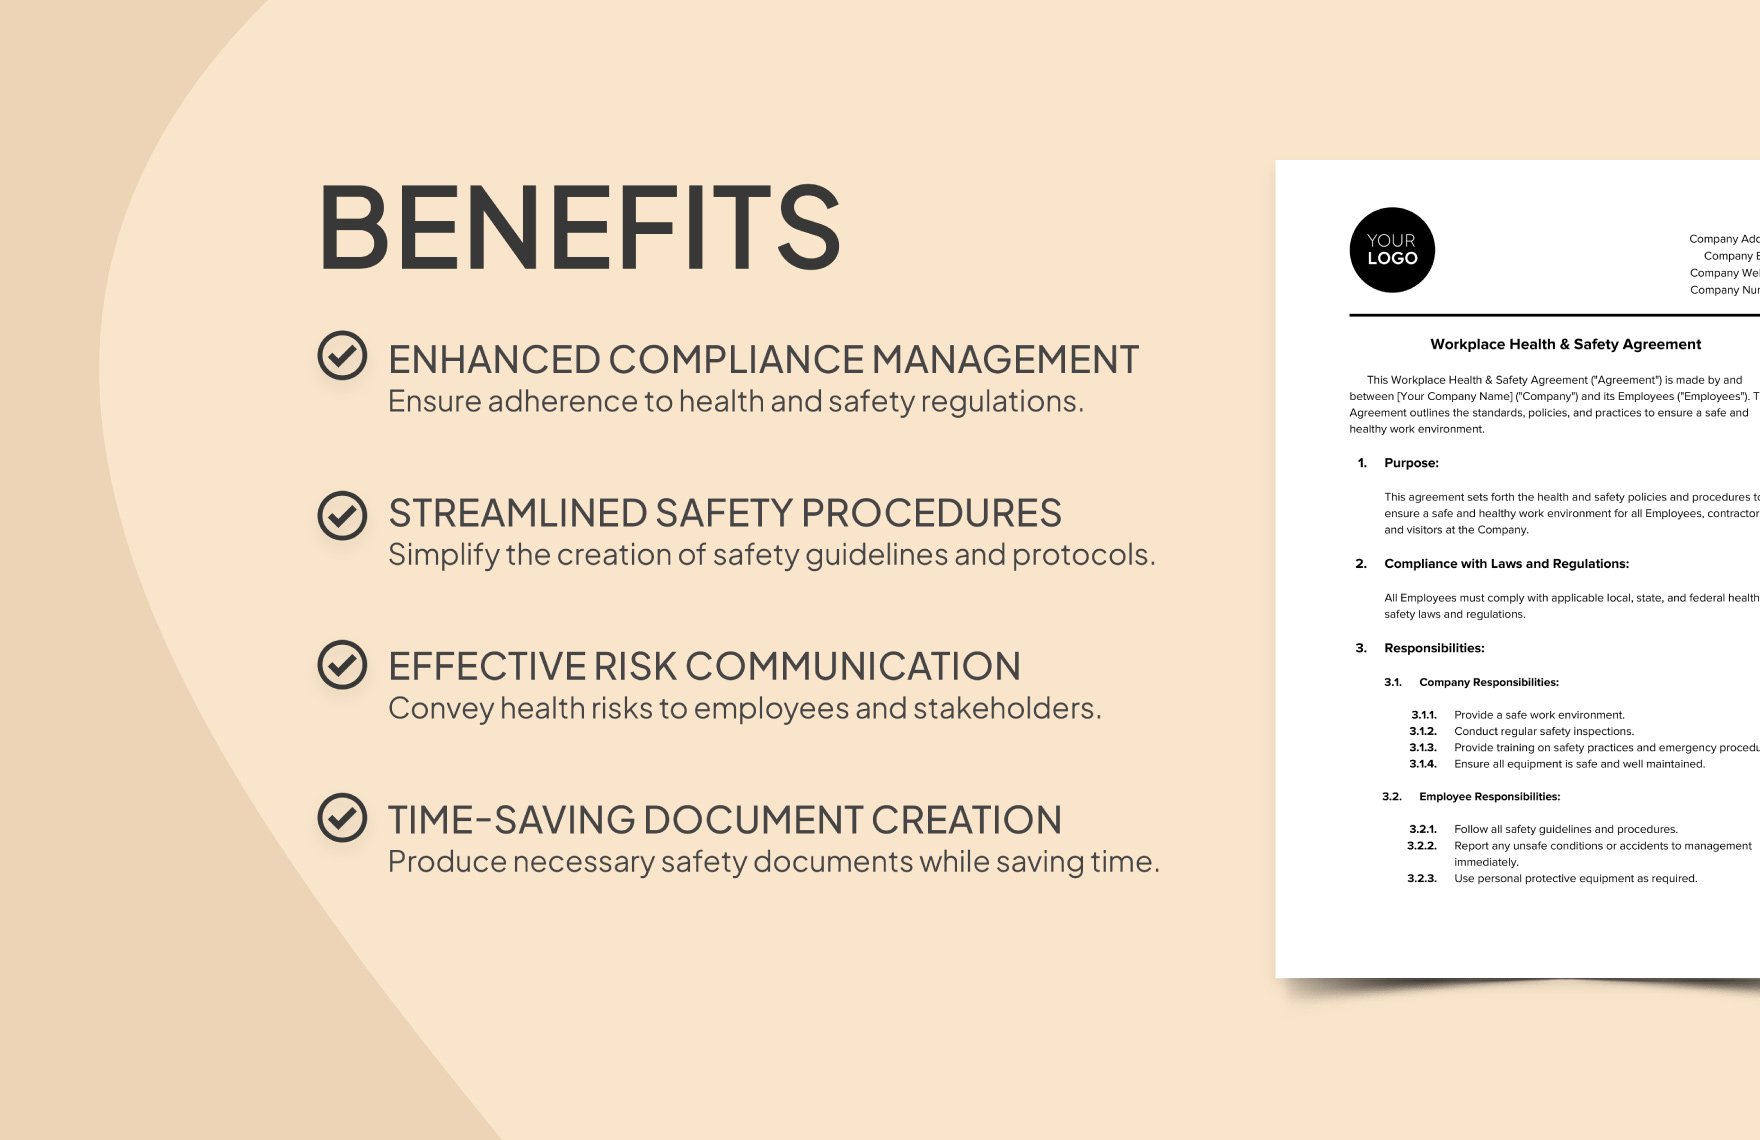 Workplace Health & Safety Agreement Template